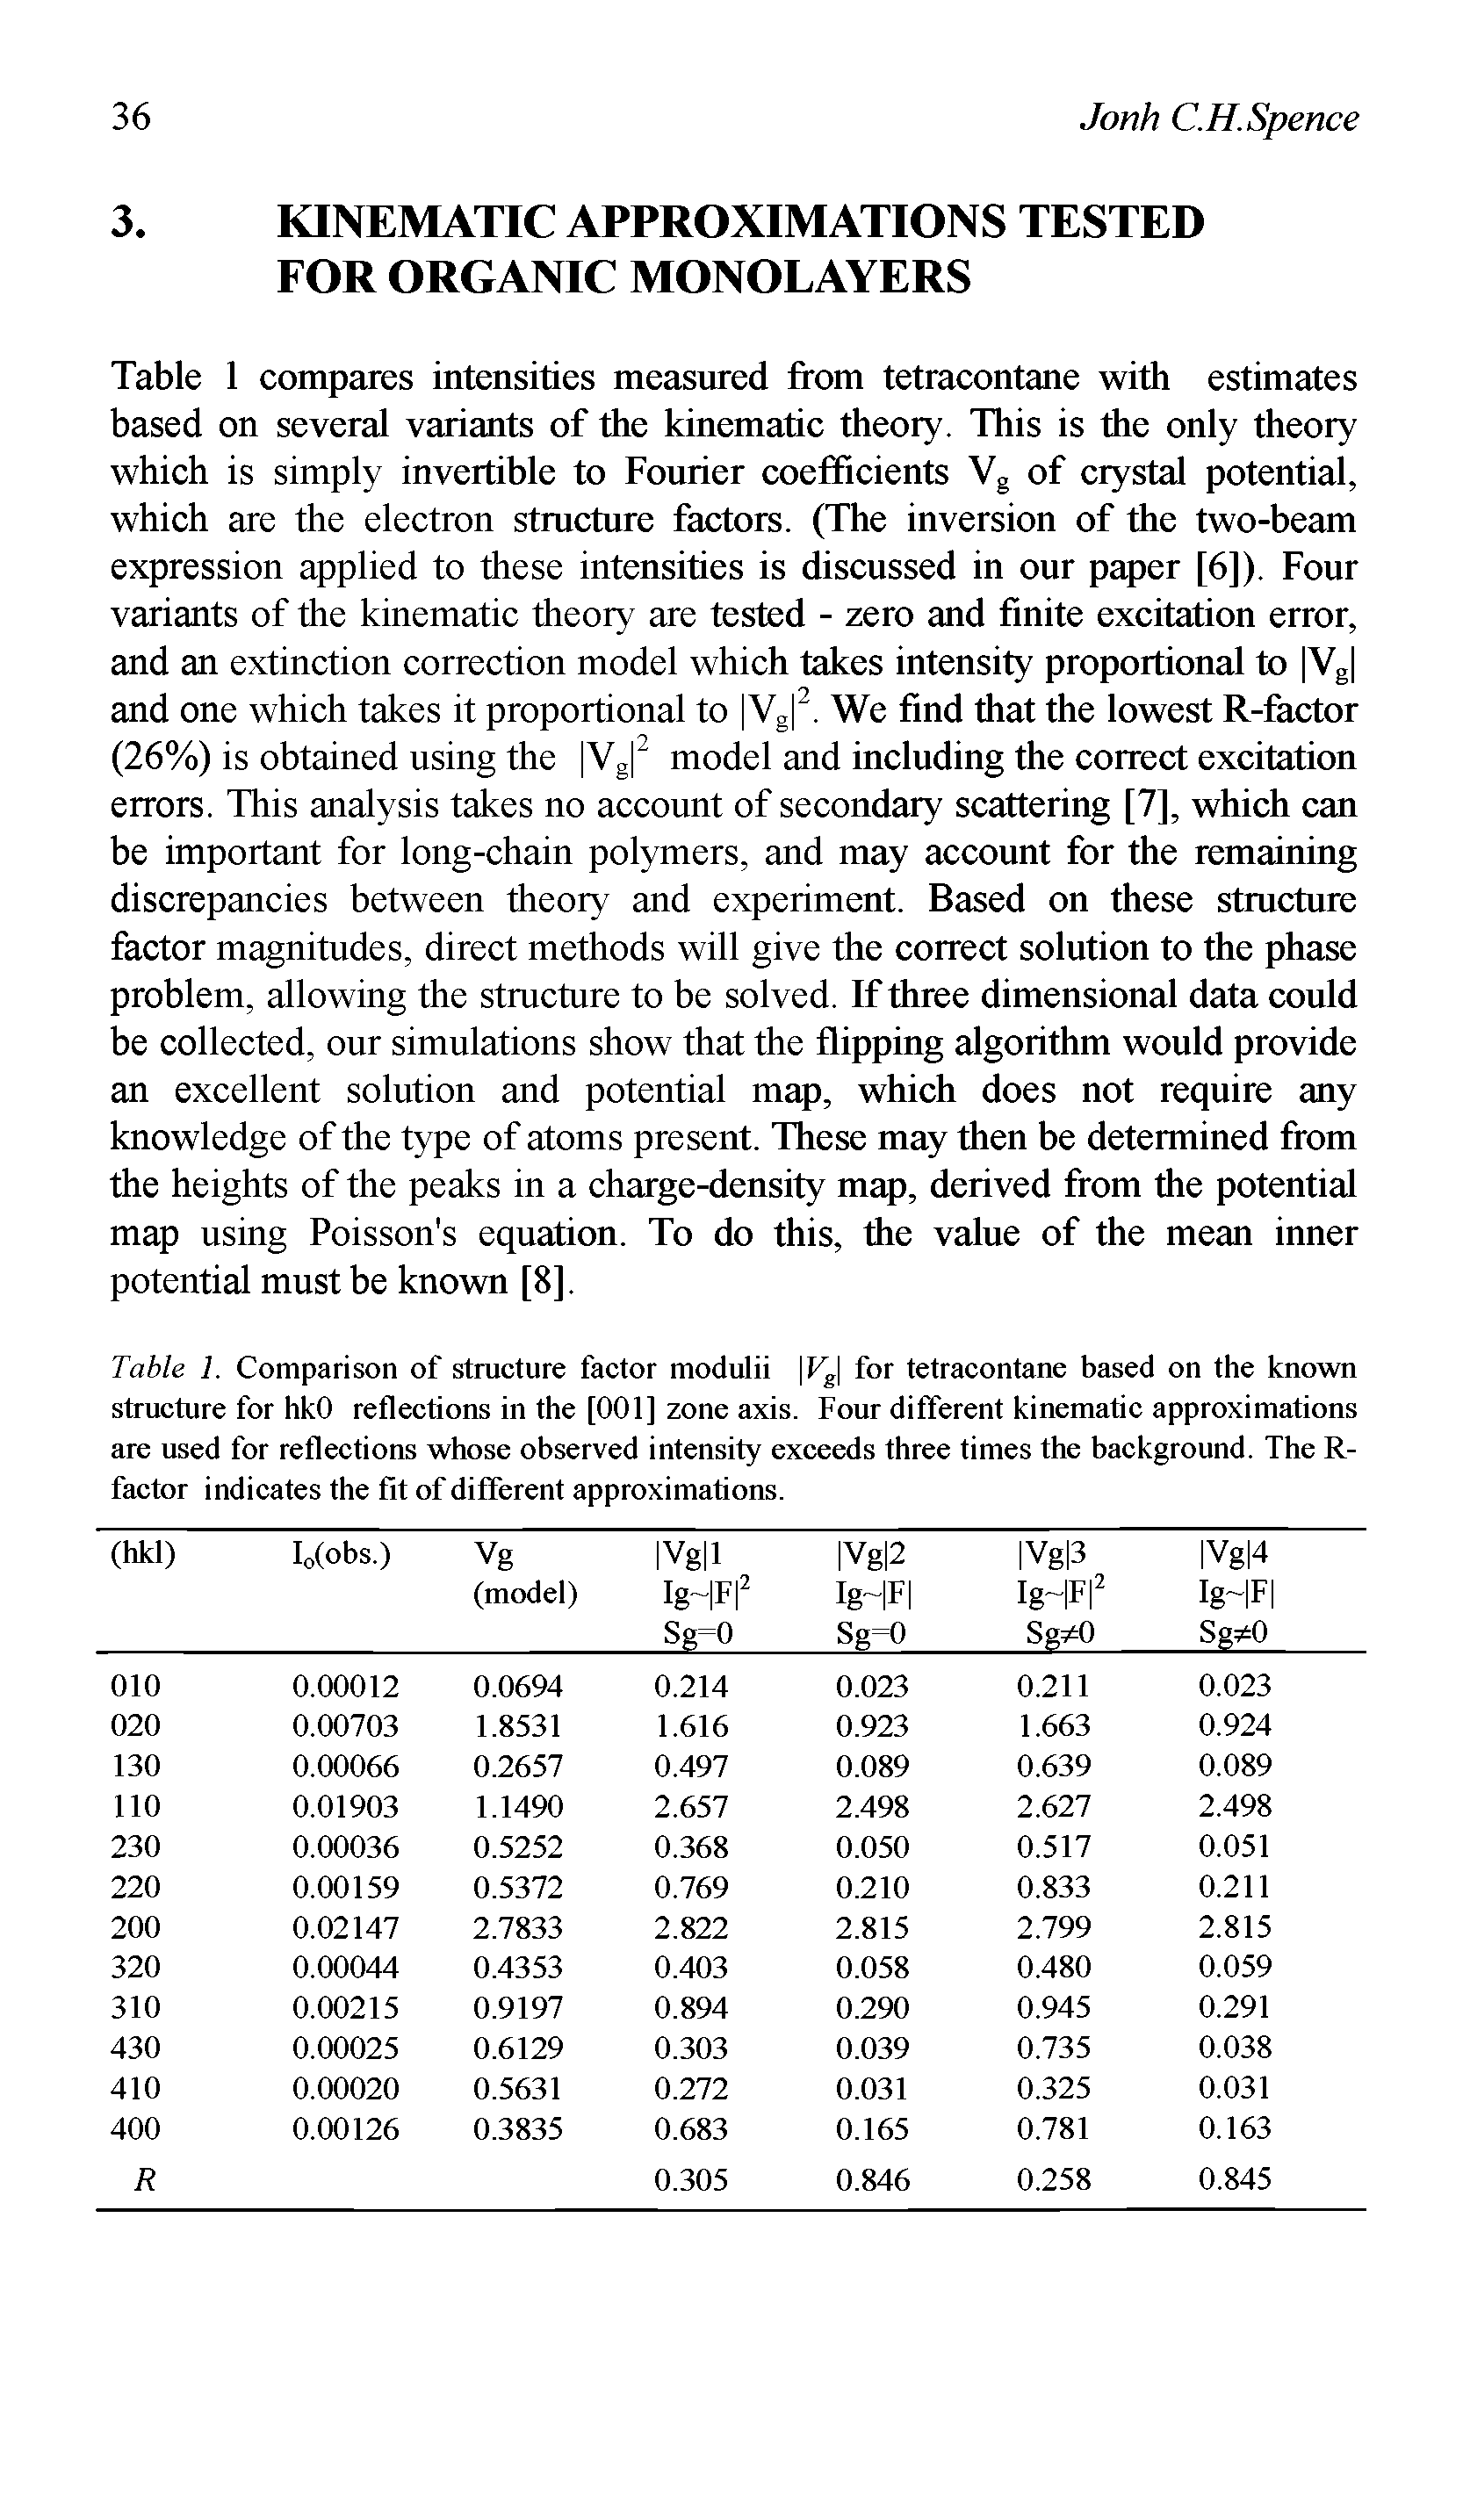 Table 1. Comparison of structure factor modulii Vg for tetracontane based on the known structure for hkO reflections in the [001] zone axis. Four different kinematic approximations are used for reflections whose observed intensity exceeds three times the background. The R-factor indicates the fit of different approximations.